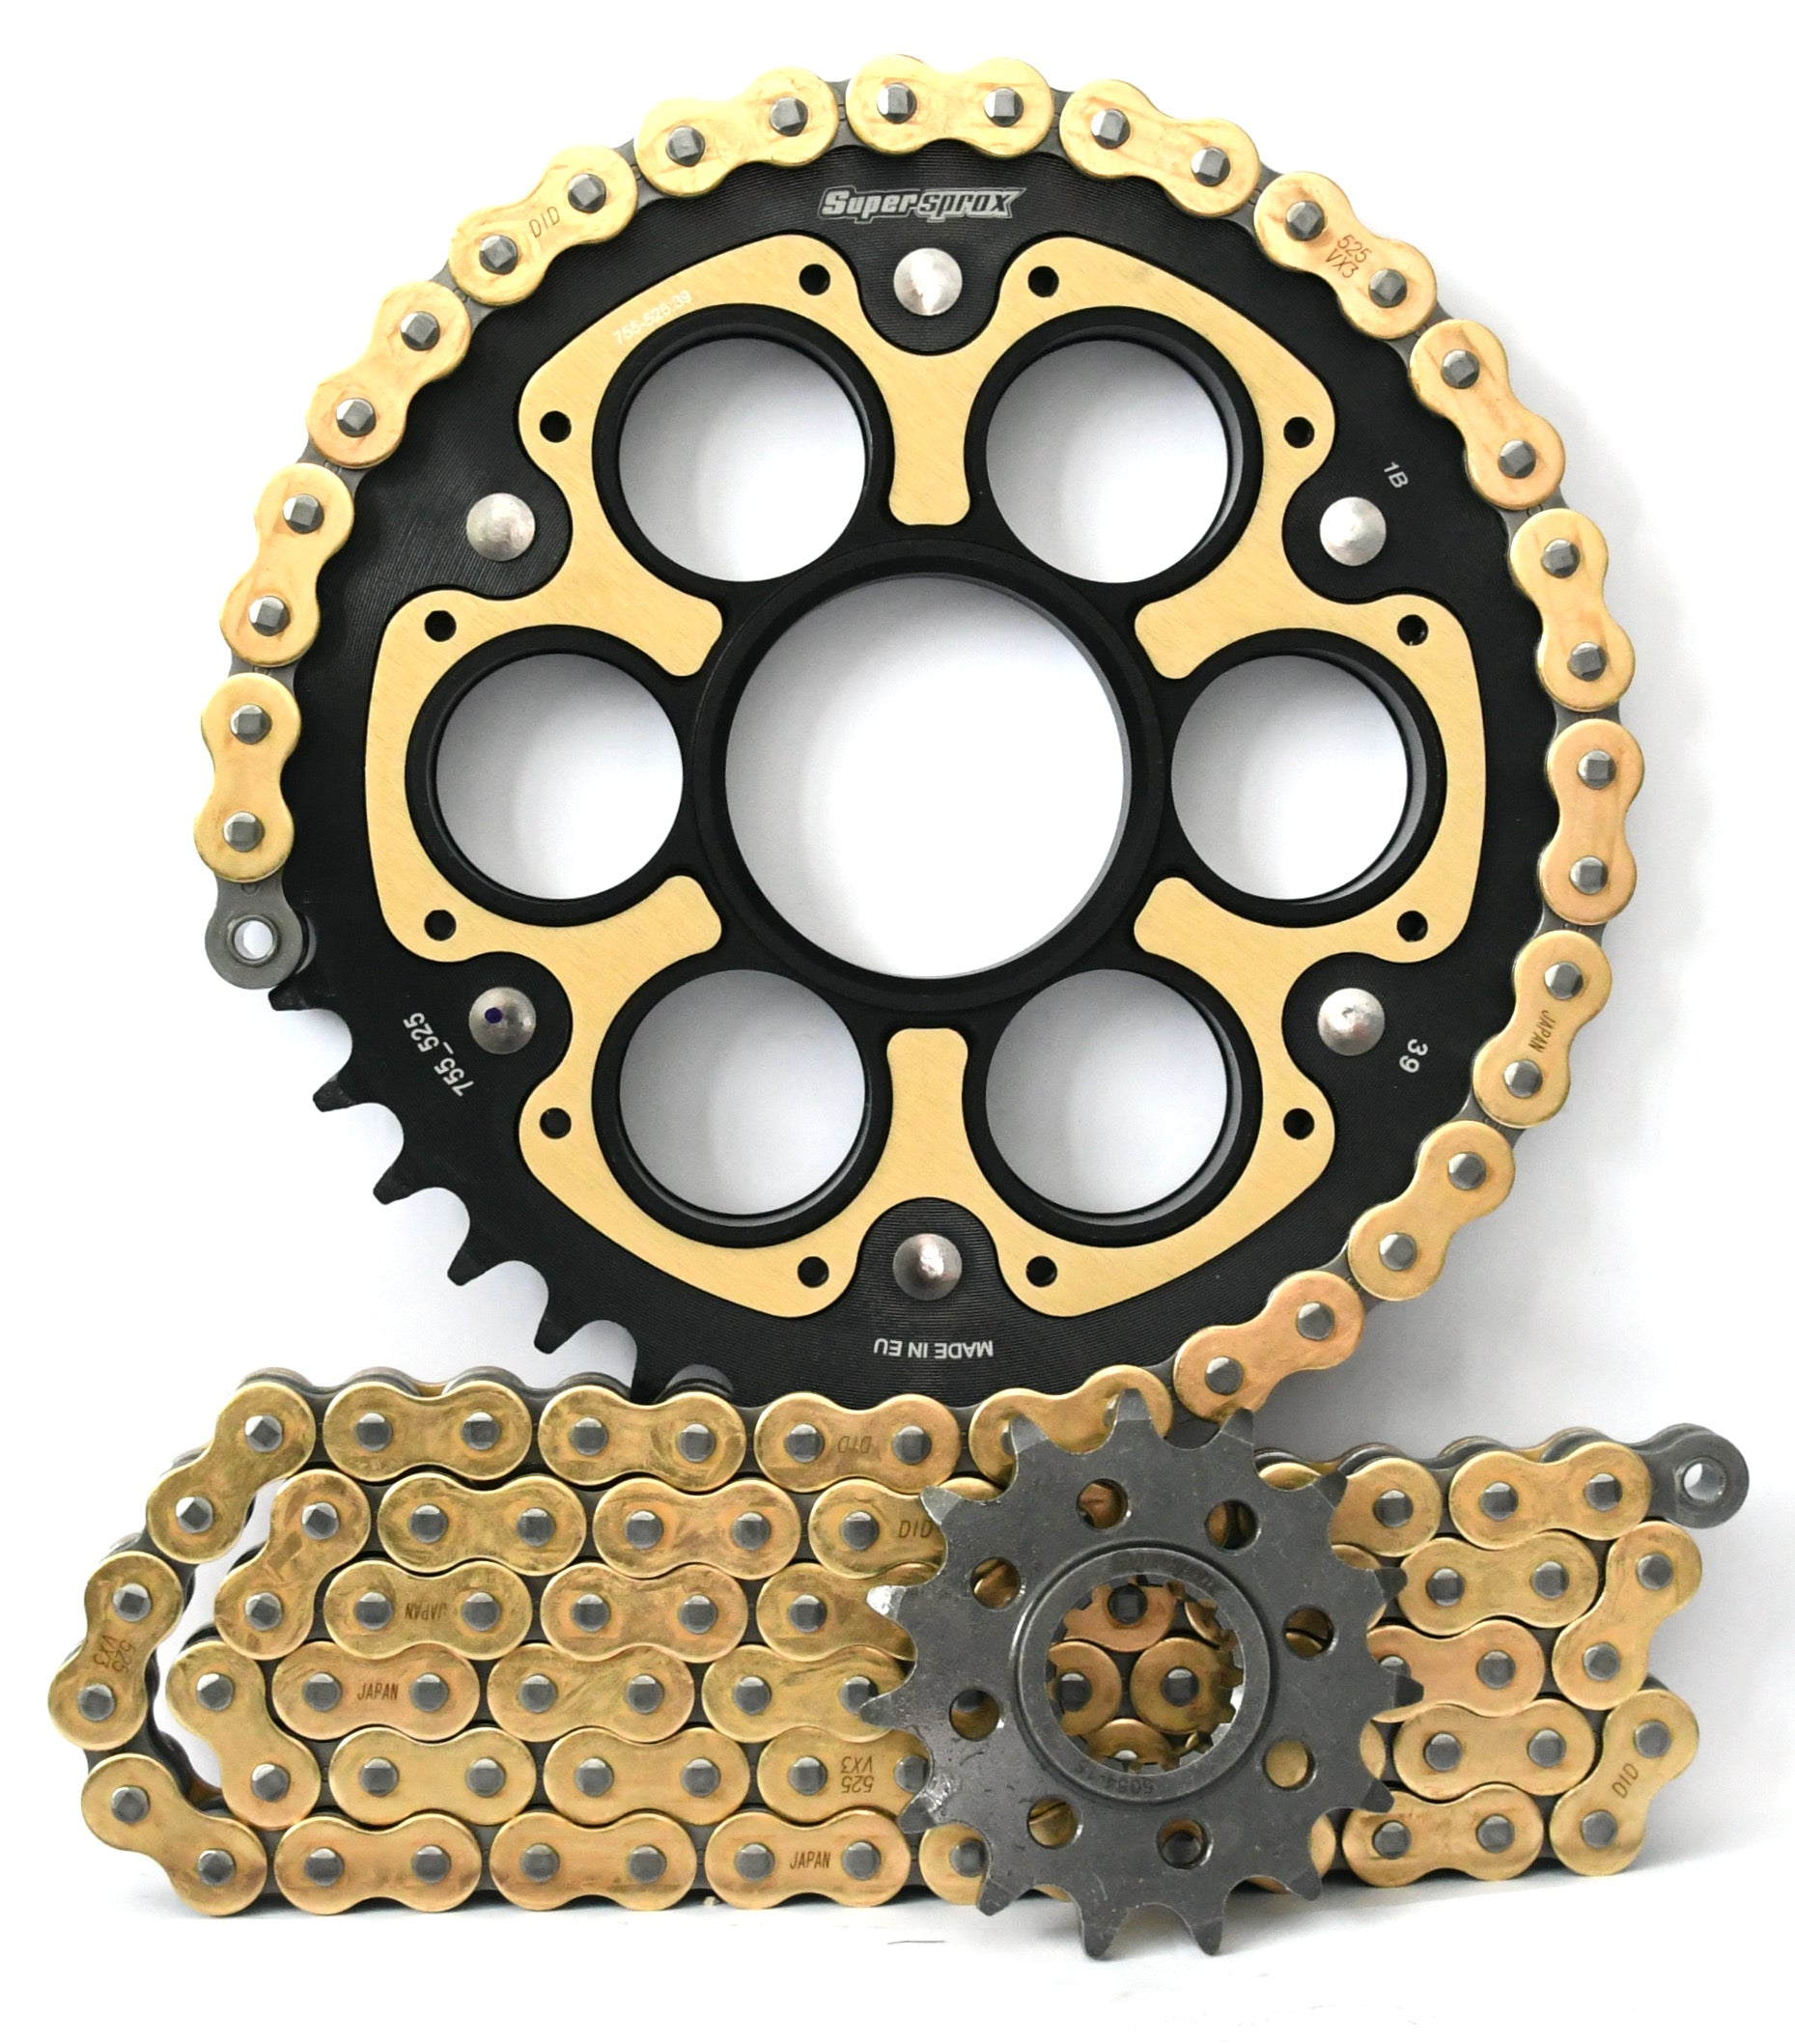 Supersprox Chain & Sprocket Kit 520 Conversion for Ducati Panigale V4 and V4S - Standard Gearing - 0